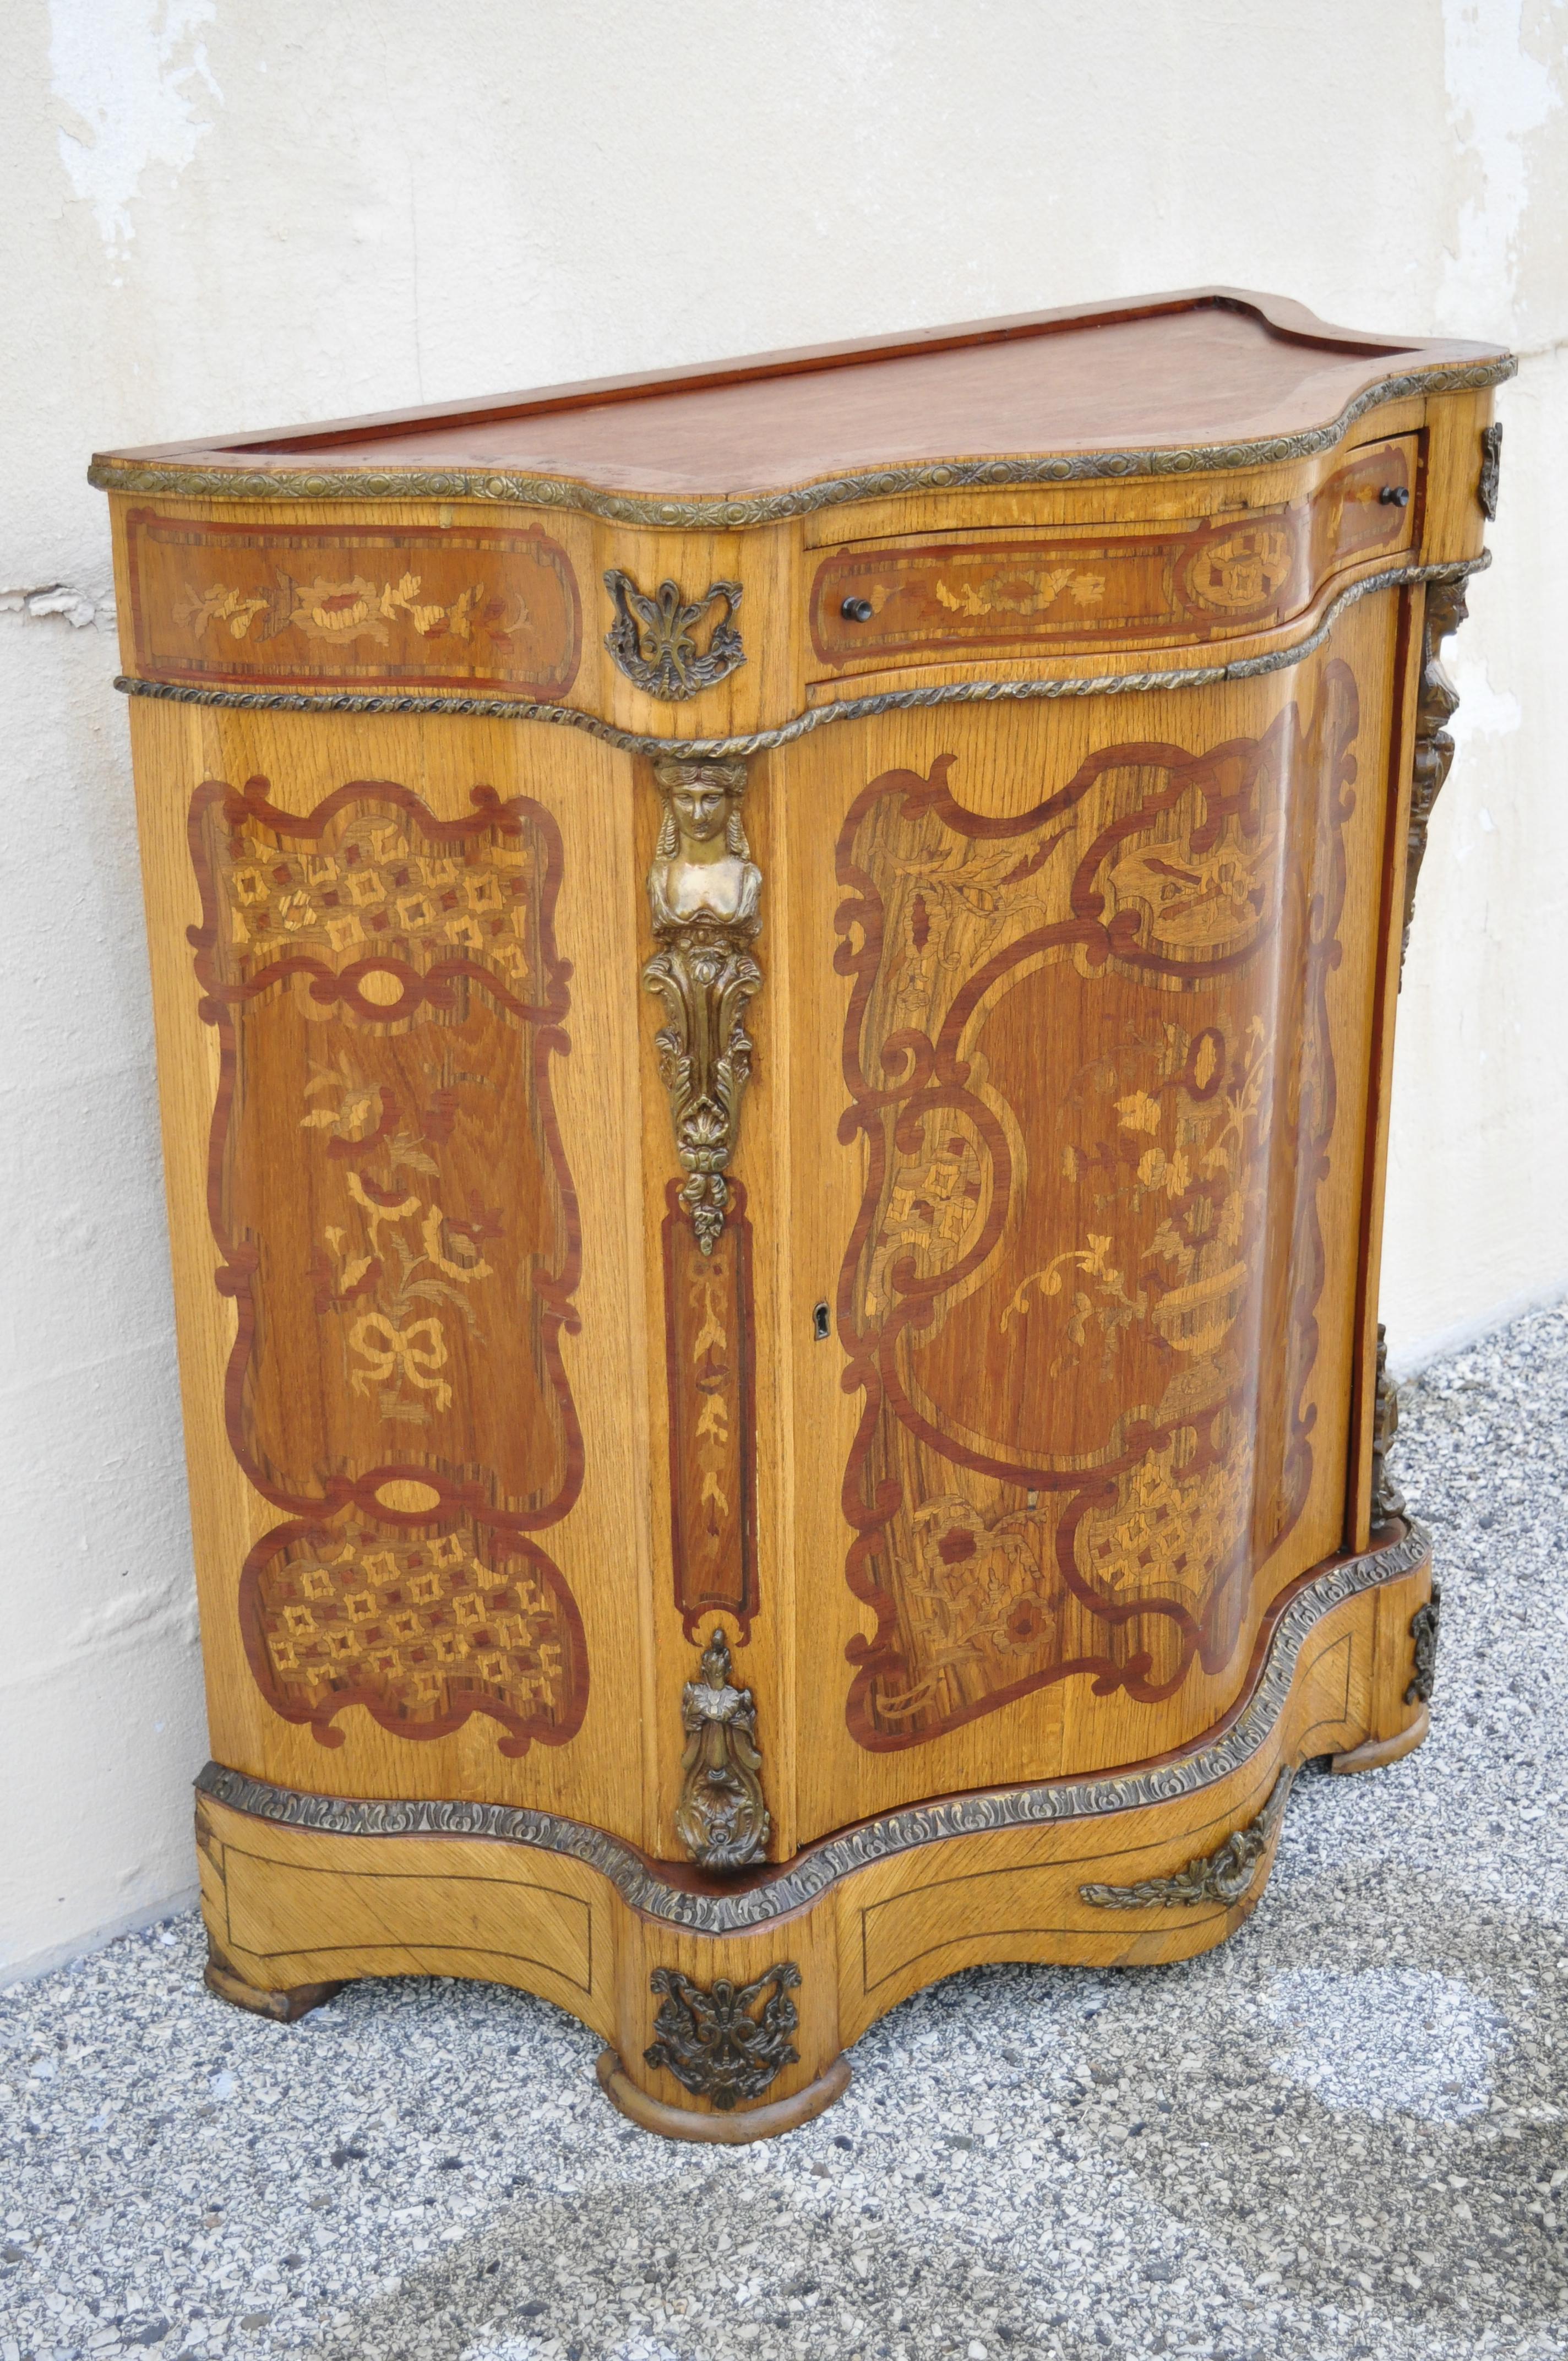 French Louis XV bronze ormolu satinwood inlay commode sideboard bombe cabinet. Item features bronze figural ormolu, nice inlay, 1 swing door, 1 drawer, great style and form, circa mid-late 20th century. Measurements: 39